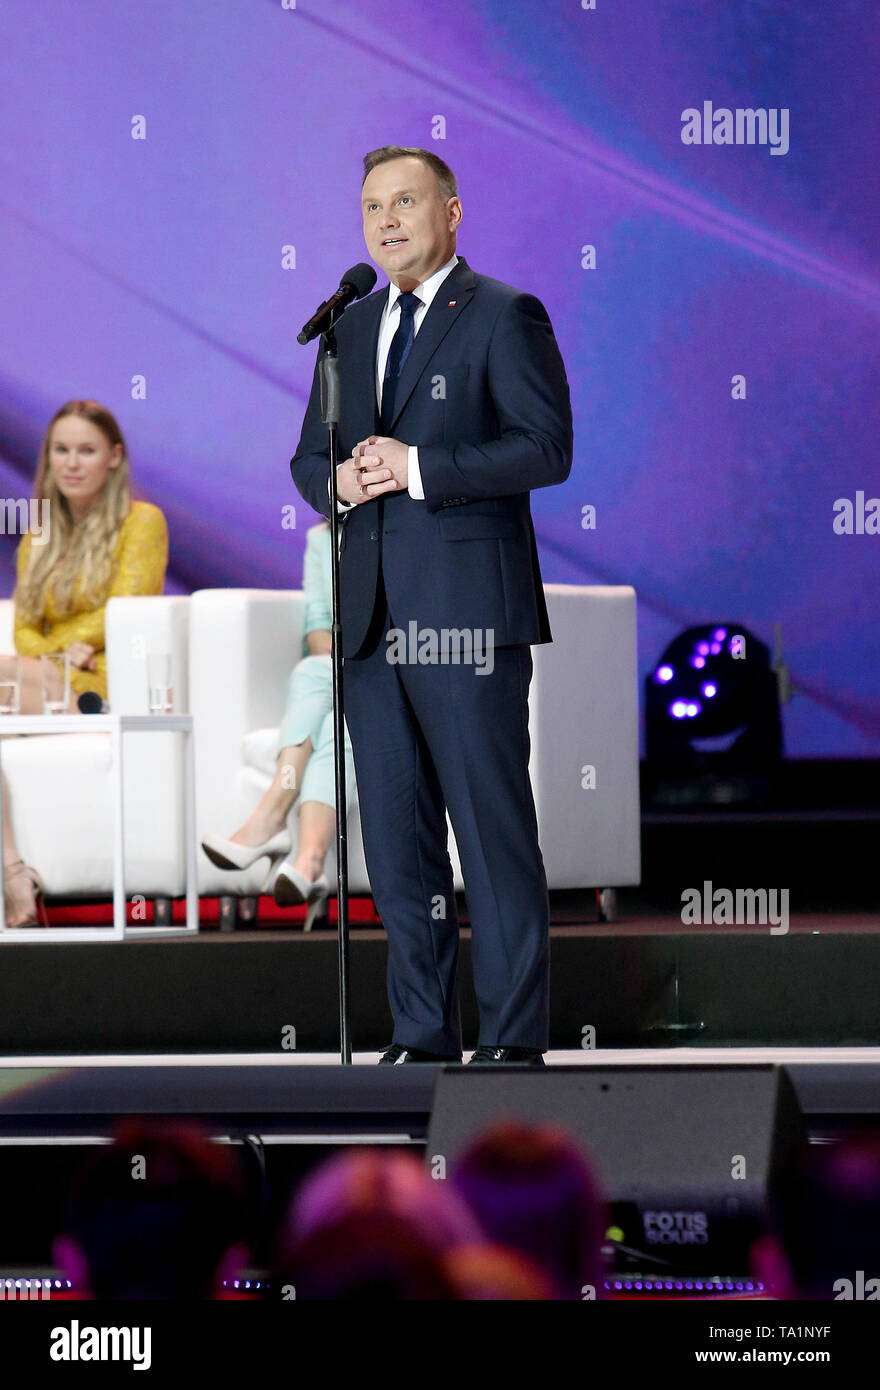 The President of Poland Andrzej Duda speaks after a tennis match in honor of Agnieszka Radwanska sport career. An event was held in honor of Polish tennis player Agnieszka Radwanska, who ended her sports career as she was the best Polish tennis player in history. Stock Photo